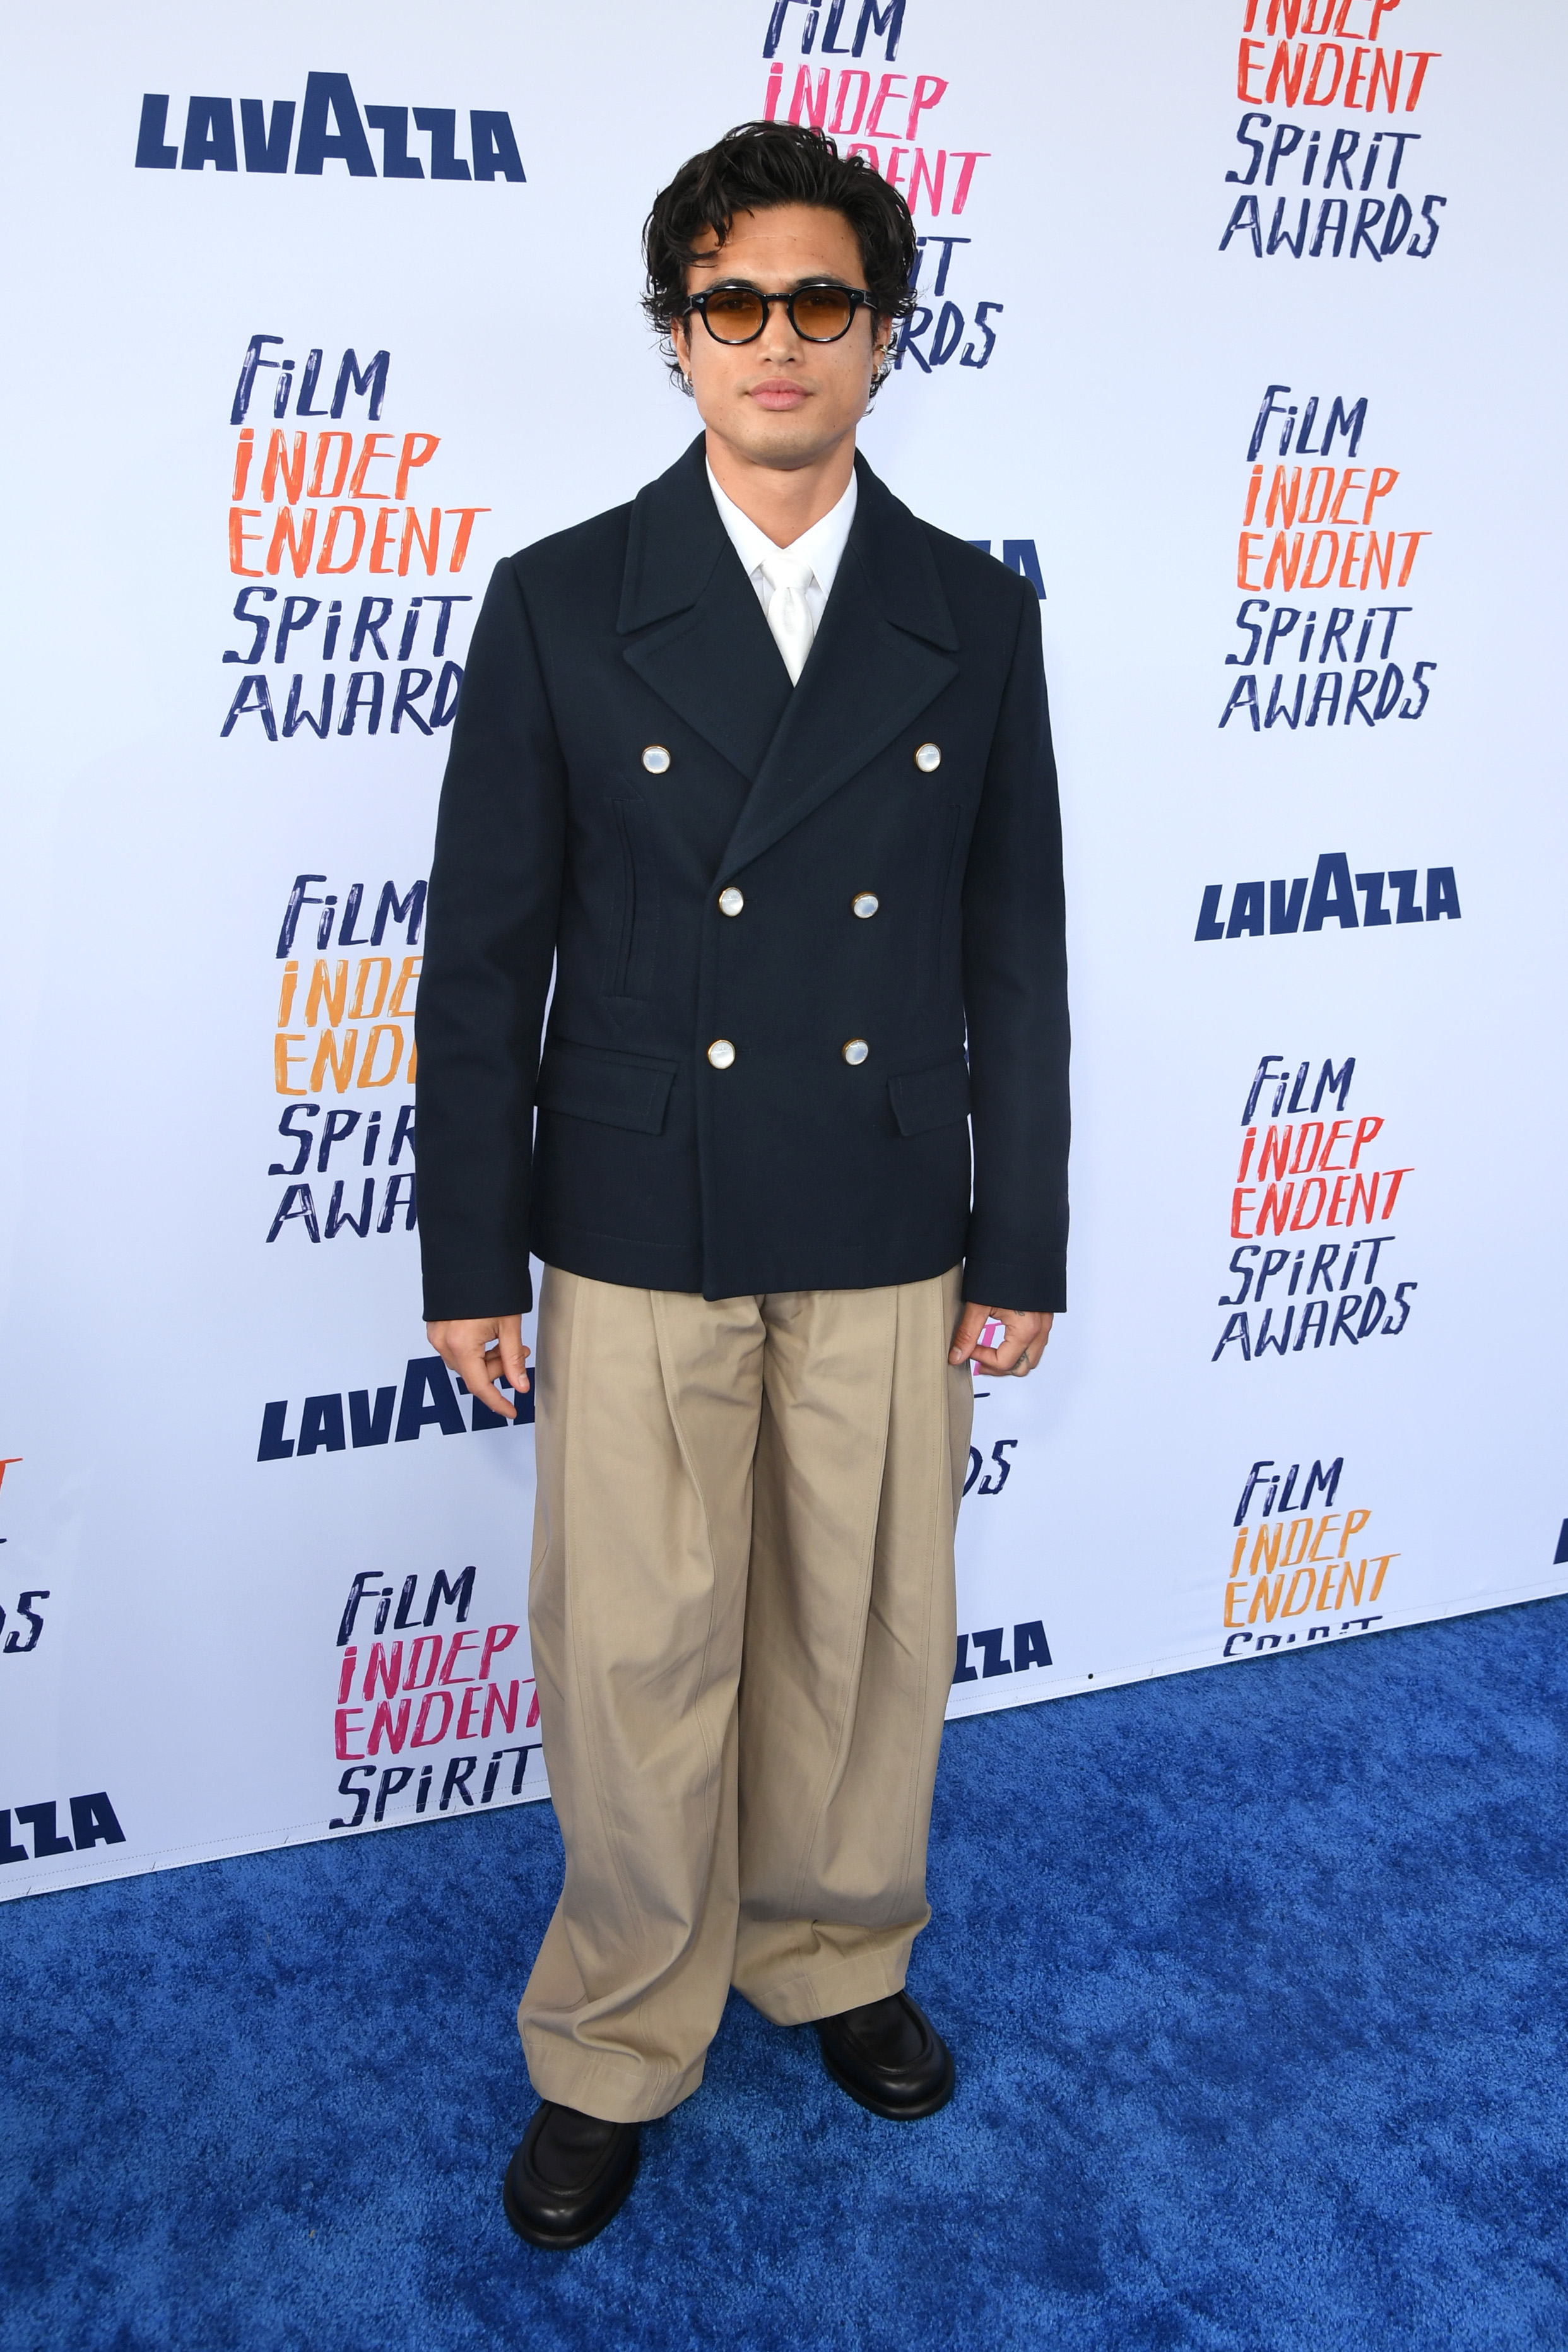 Charles in a double-breasted jacket and wide-leg trousers poses at the Film Independent Spirit Awards